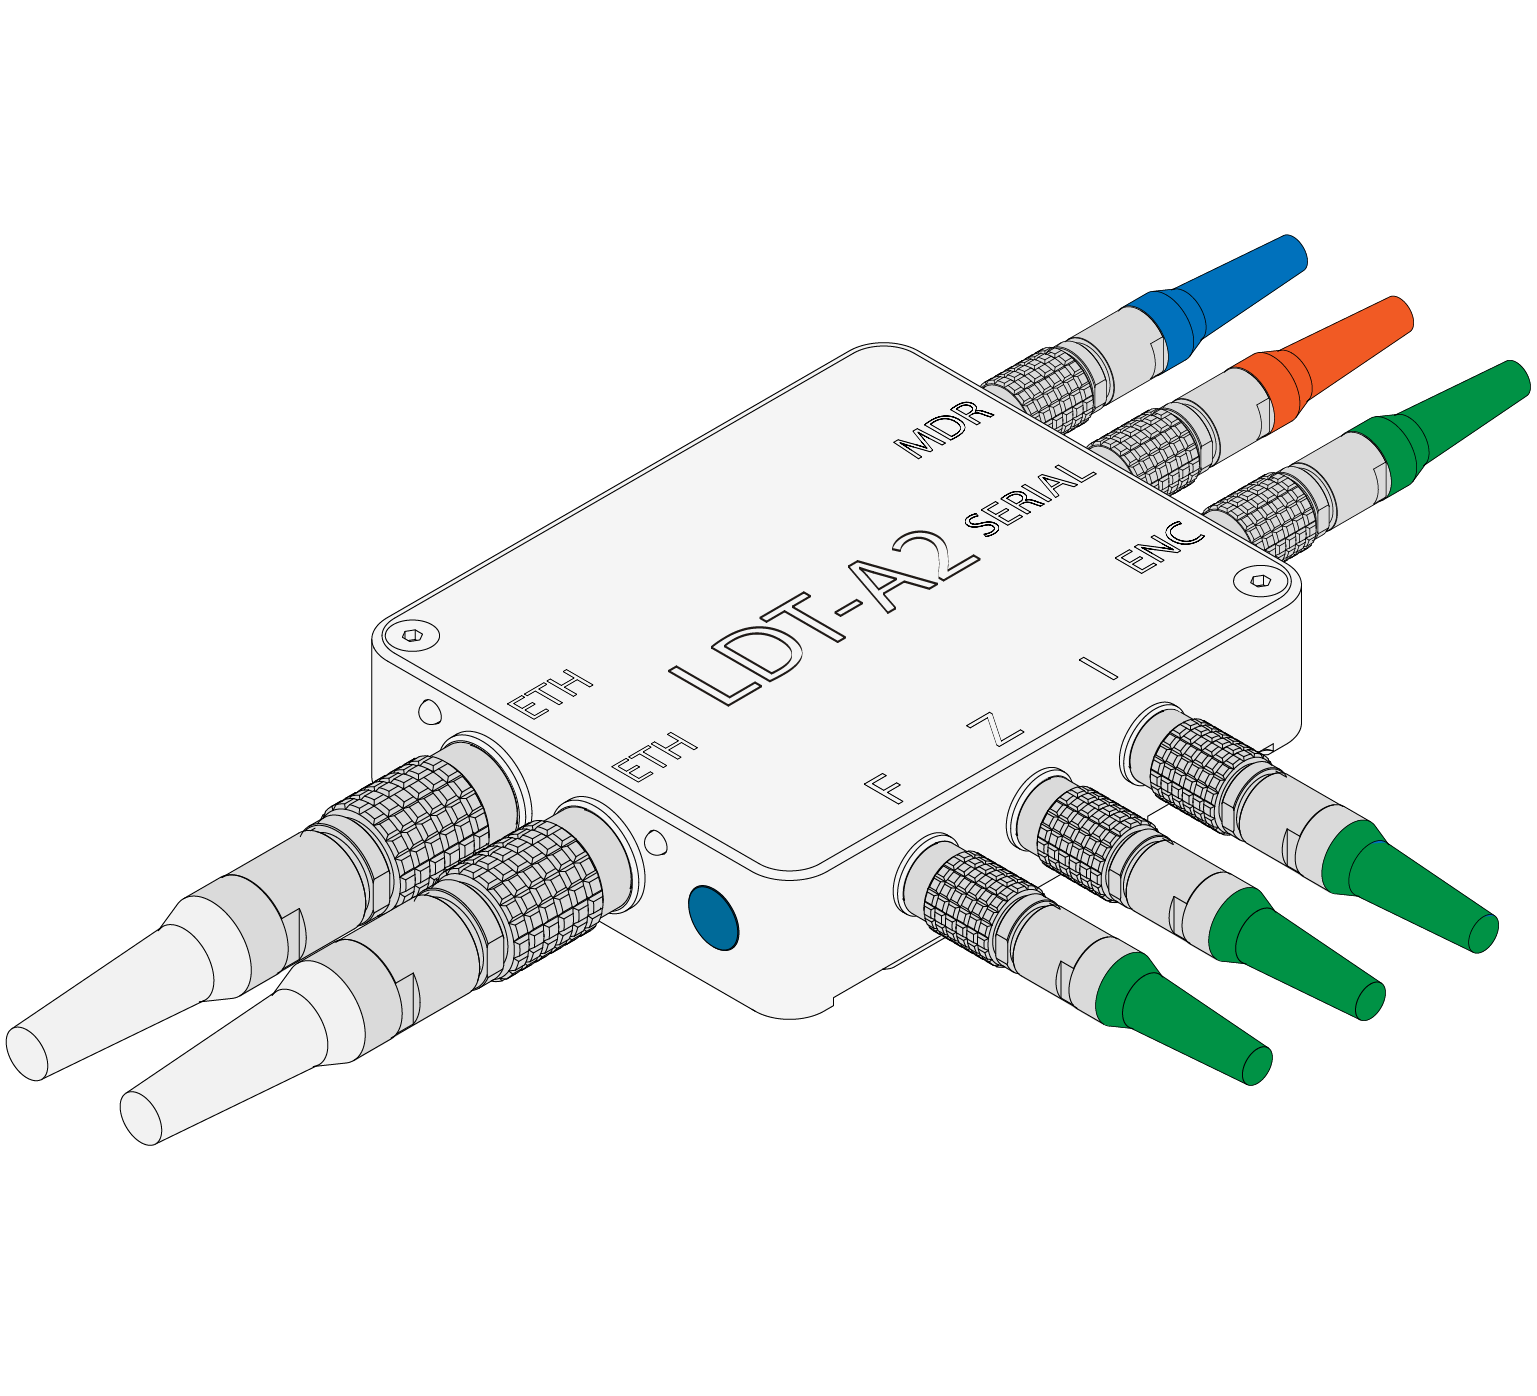 manualsdrawings_ldt-a2_cable.png